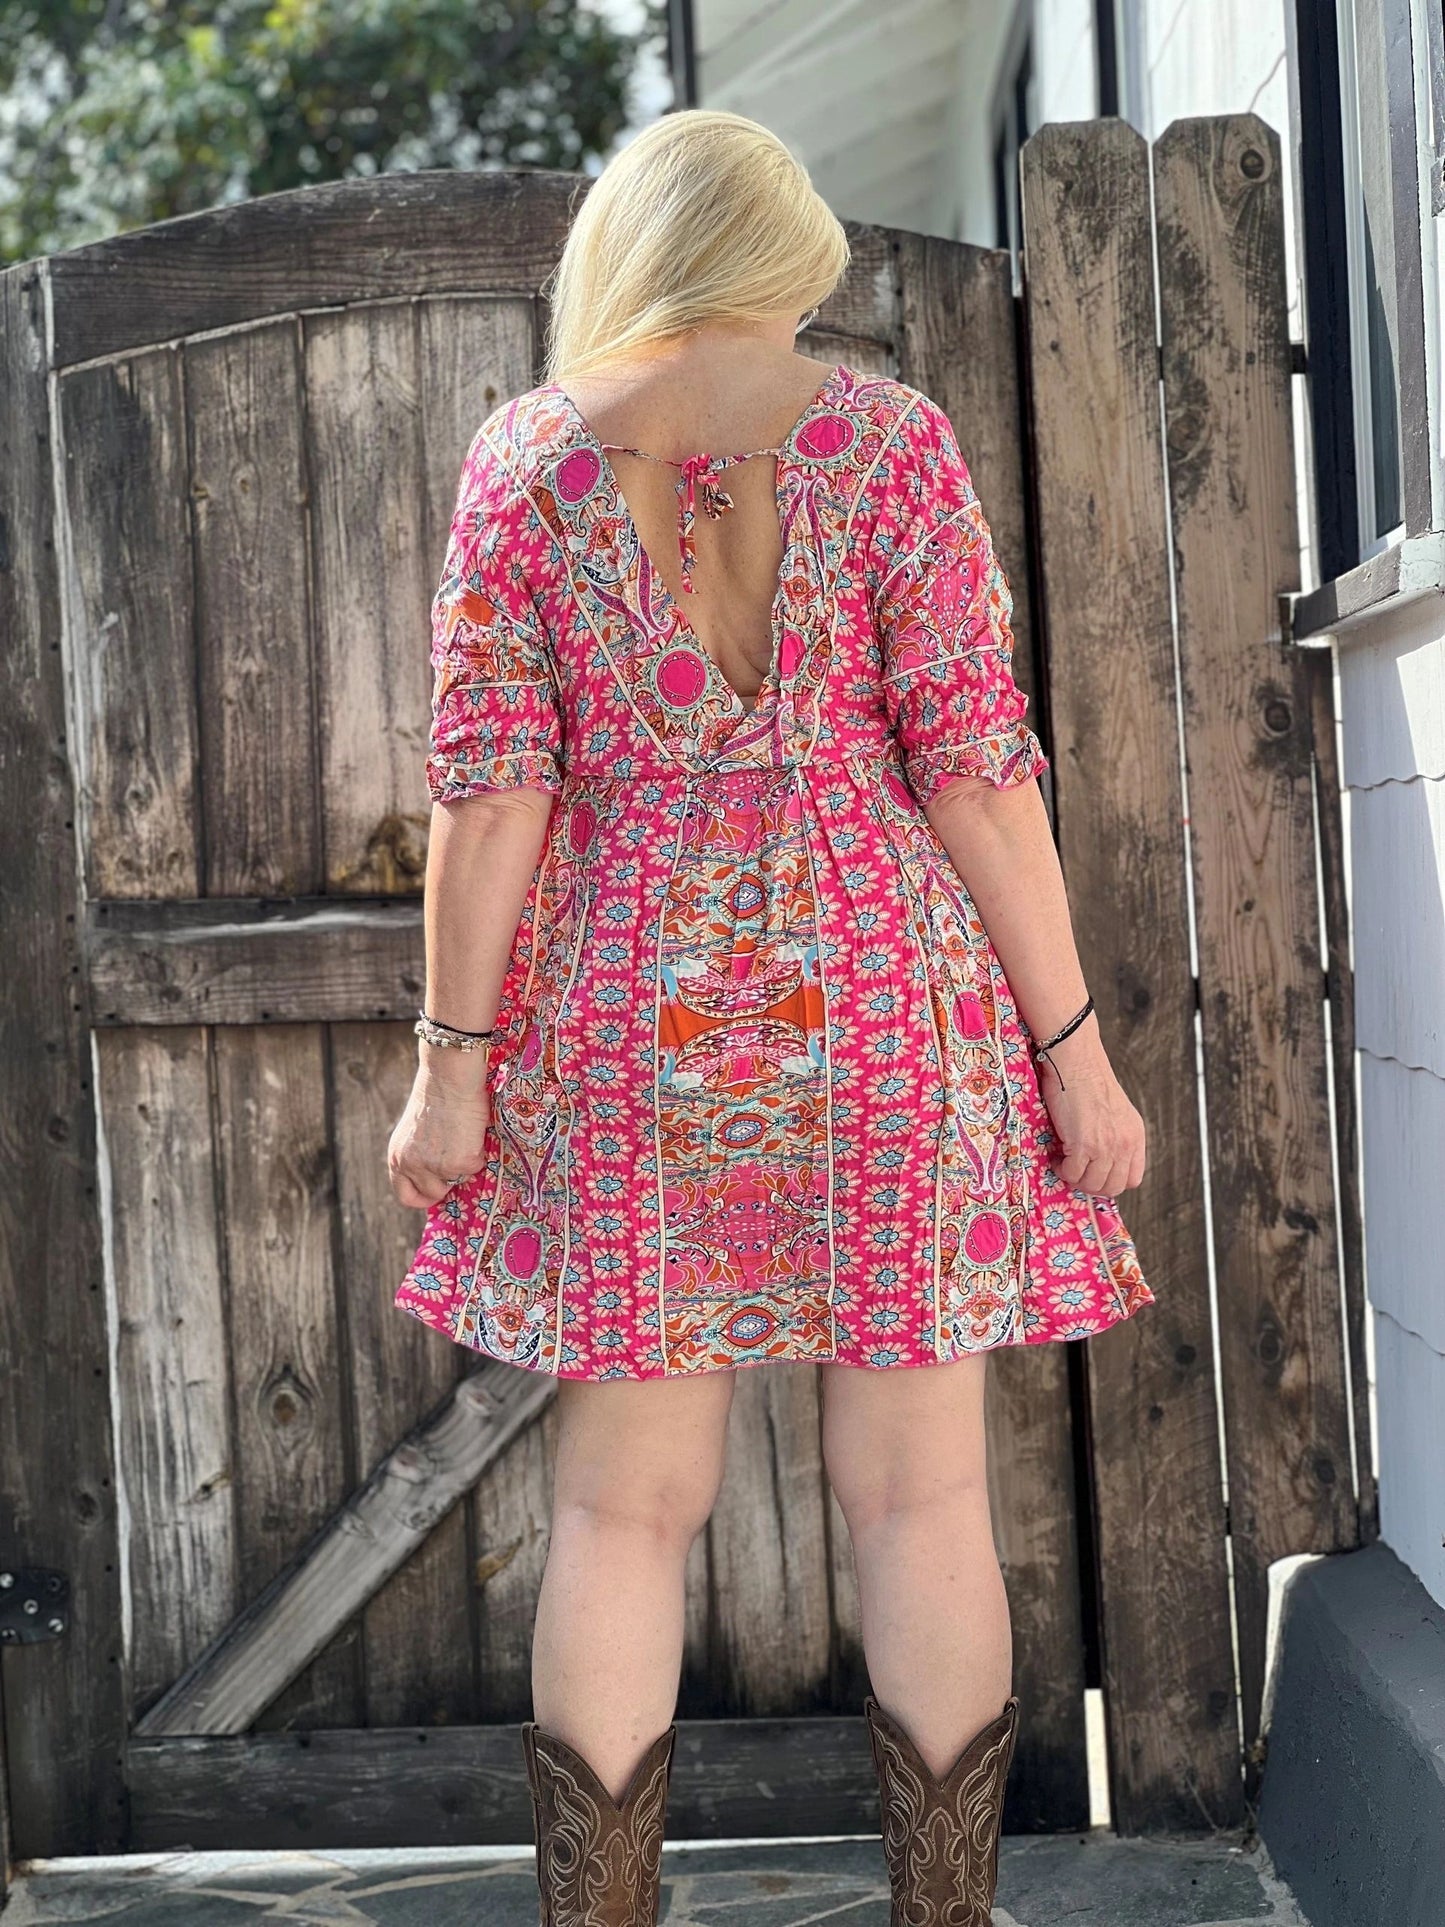 The Sunshine Floral Mini Dress with Floral Pattern and 3/4 sleeve